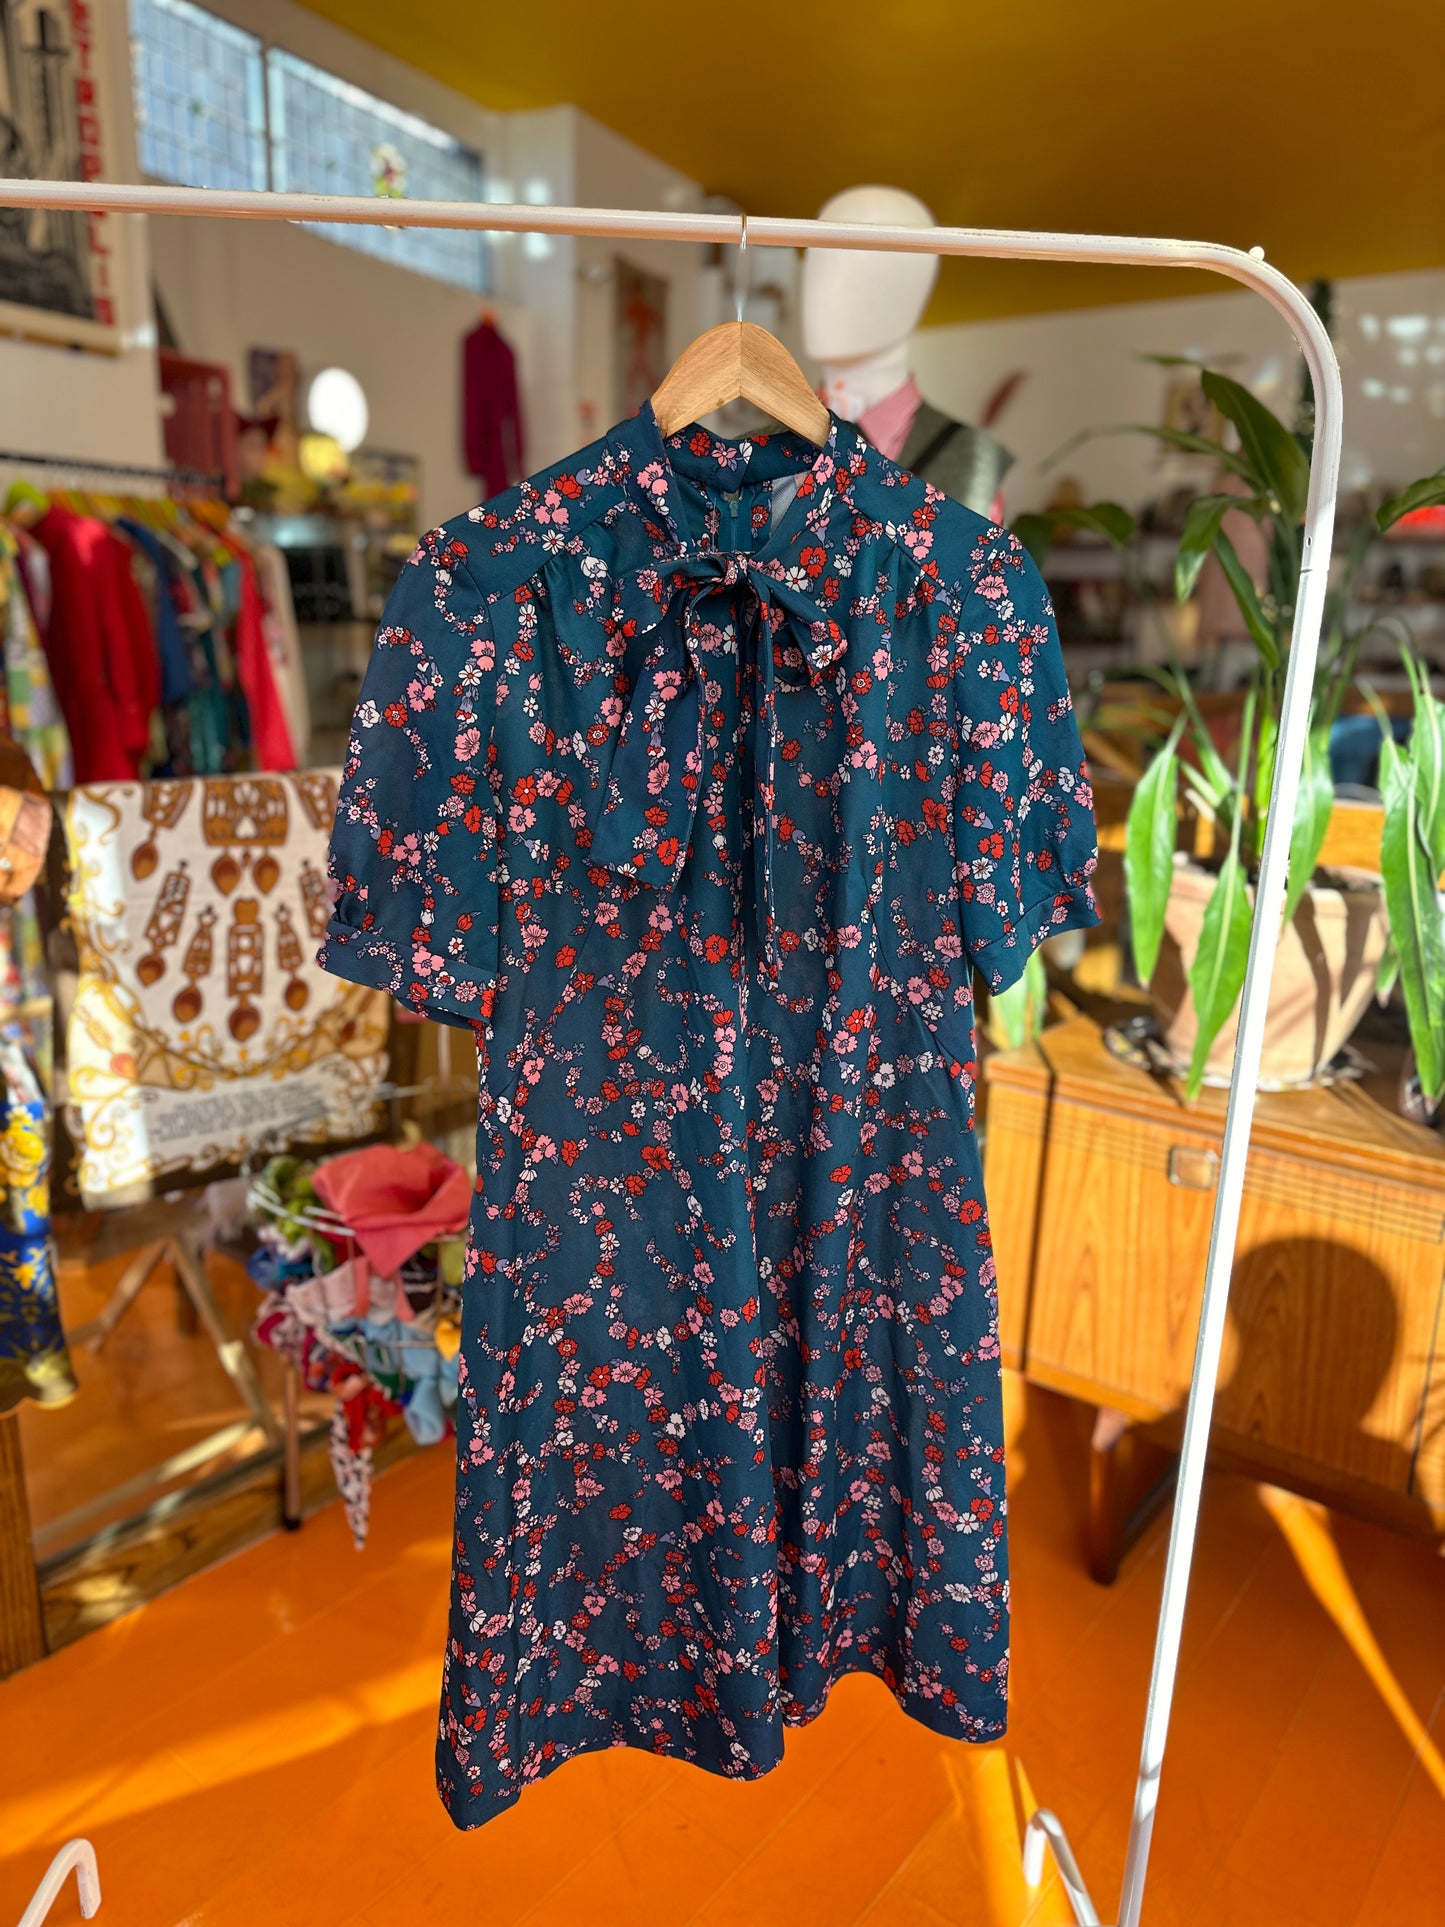 Handmade Vintage Floral Dress in 50s Style with Pussybow